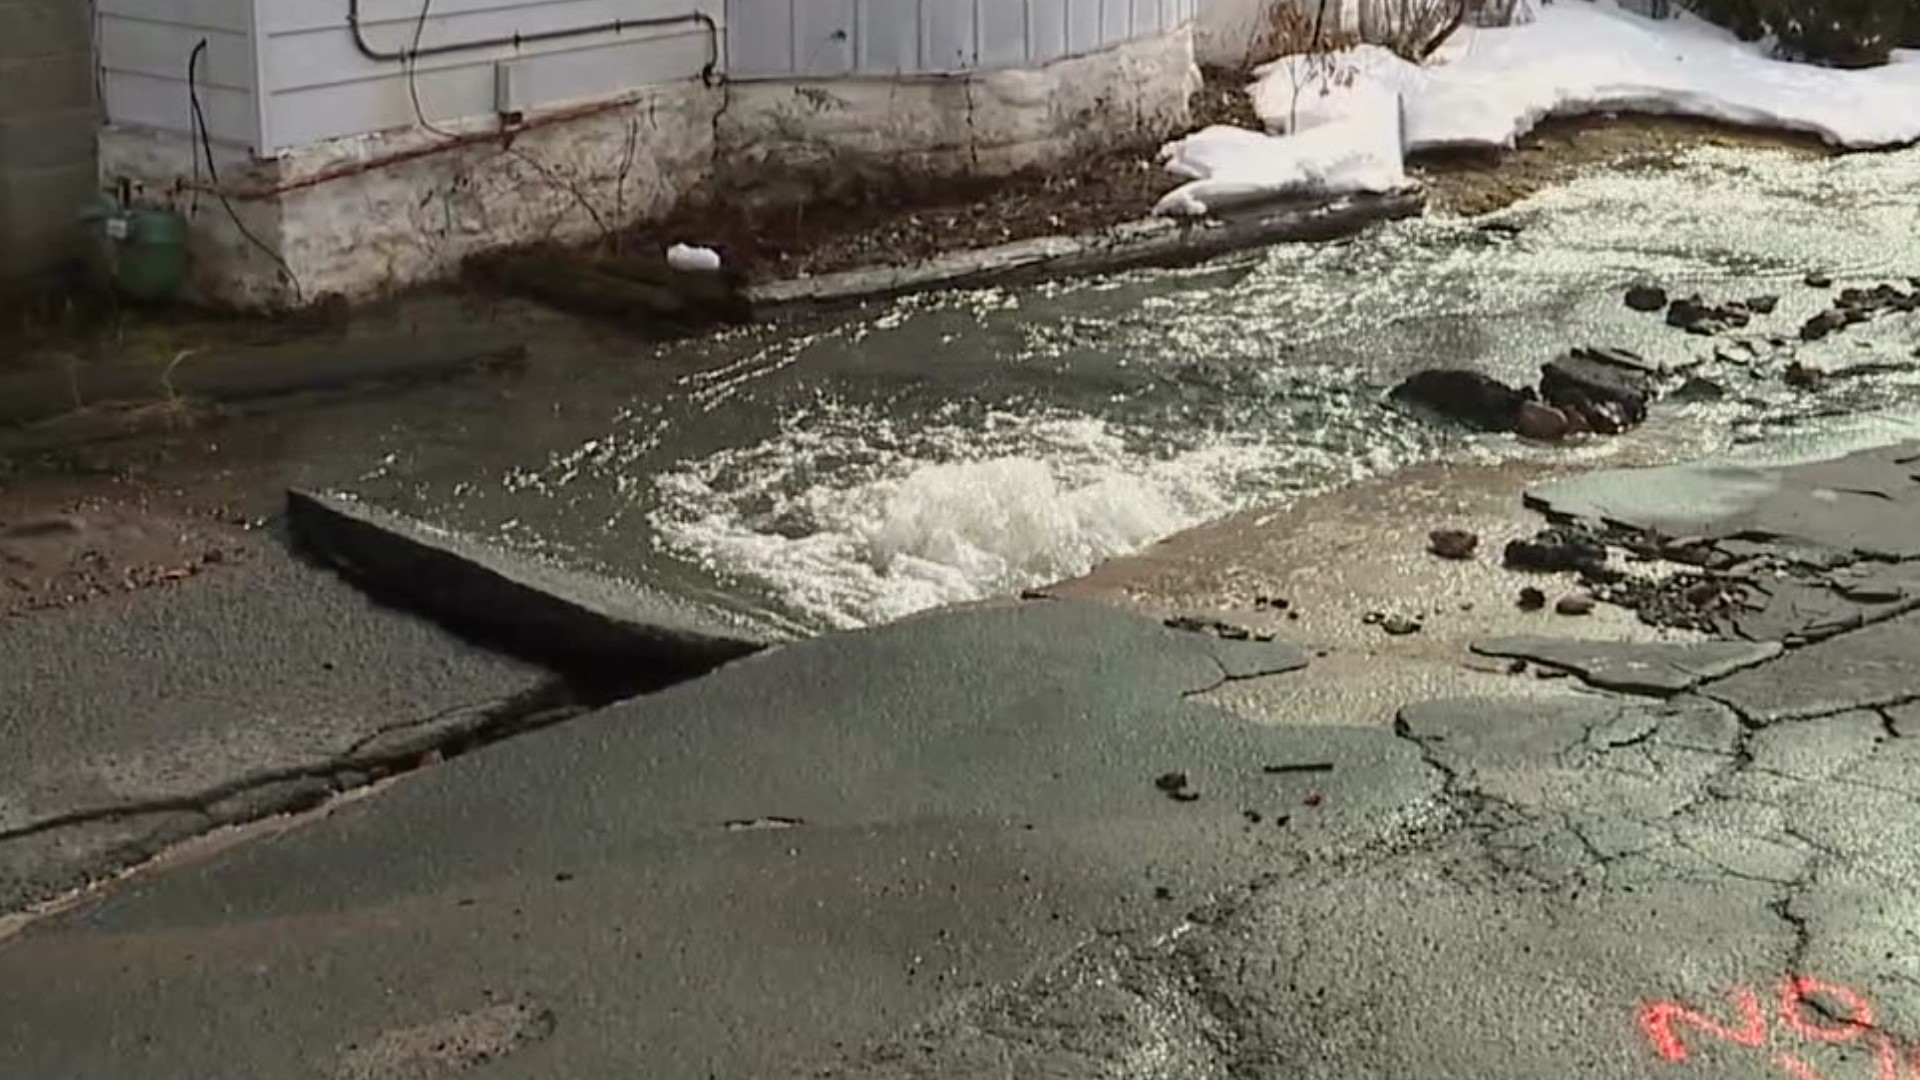 Pennsylvania American Water officials say about 500 homes and businesses are affected.